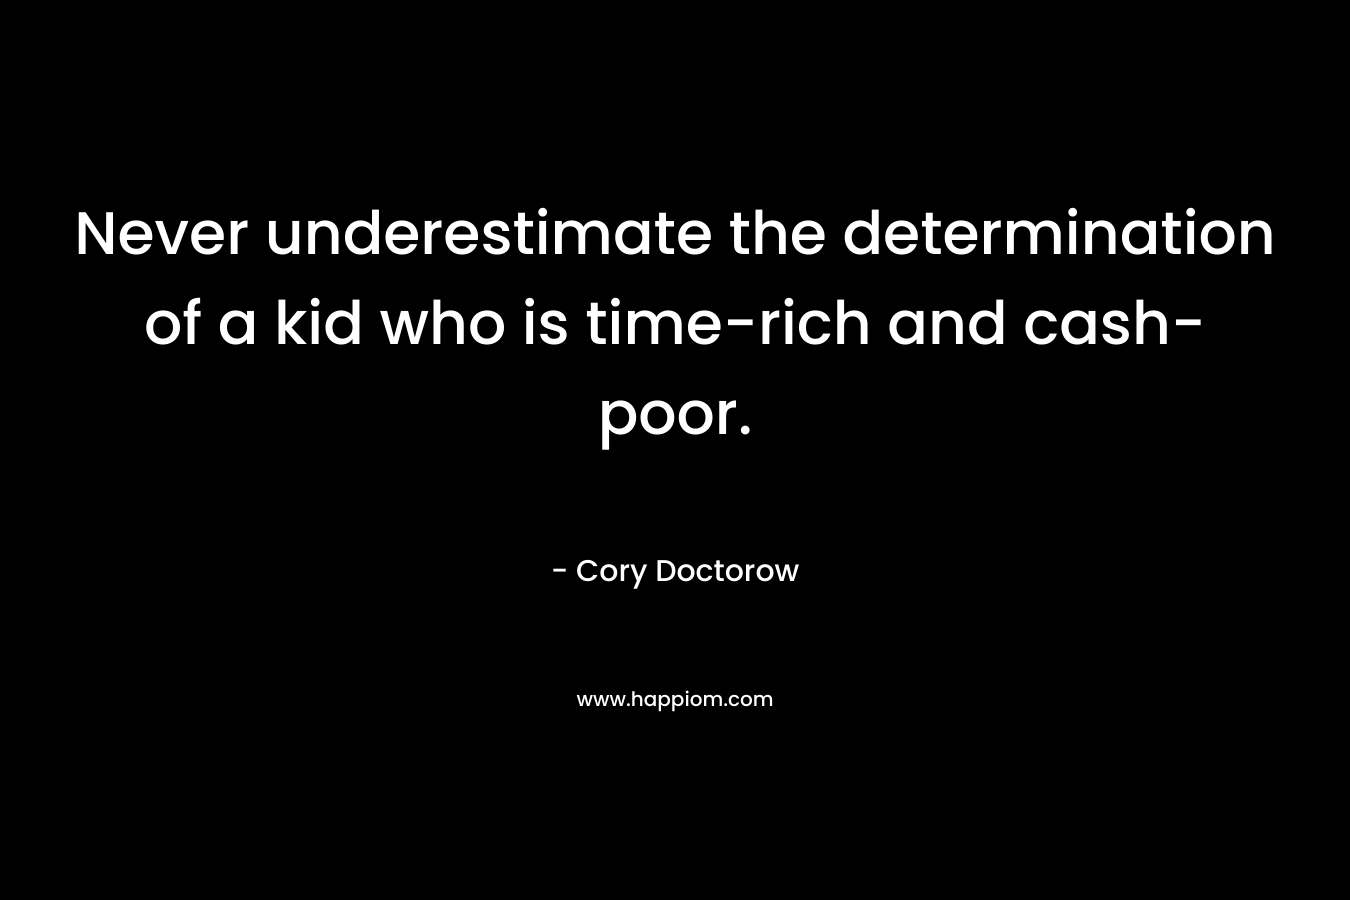 Never underestimate the determination of a kid who is time-rich and cash-poor. – Cory Doctorow